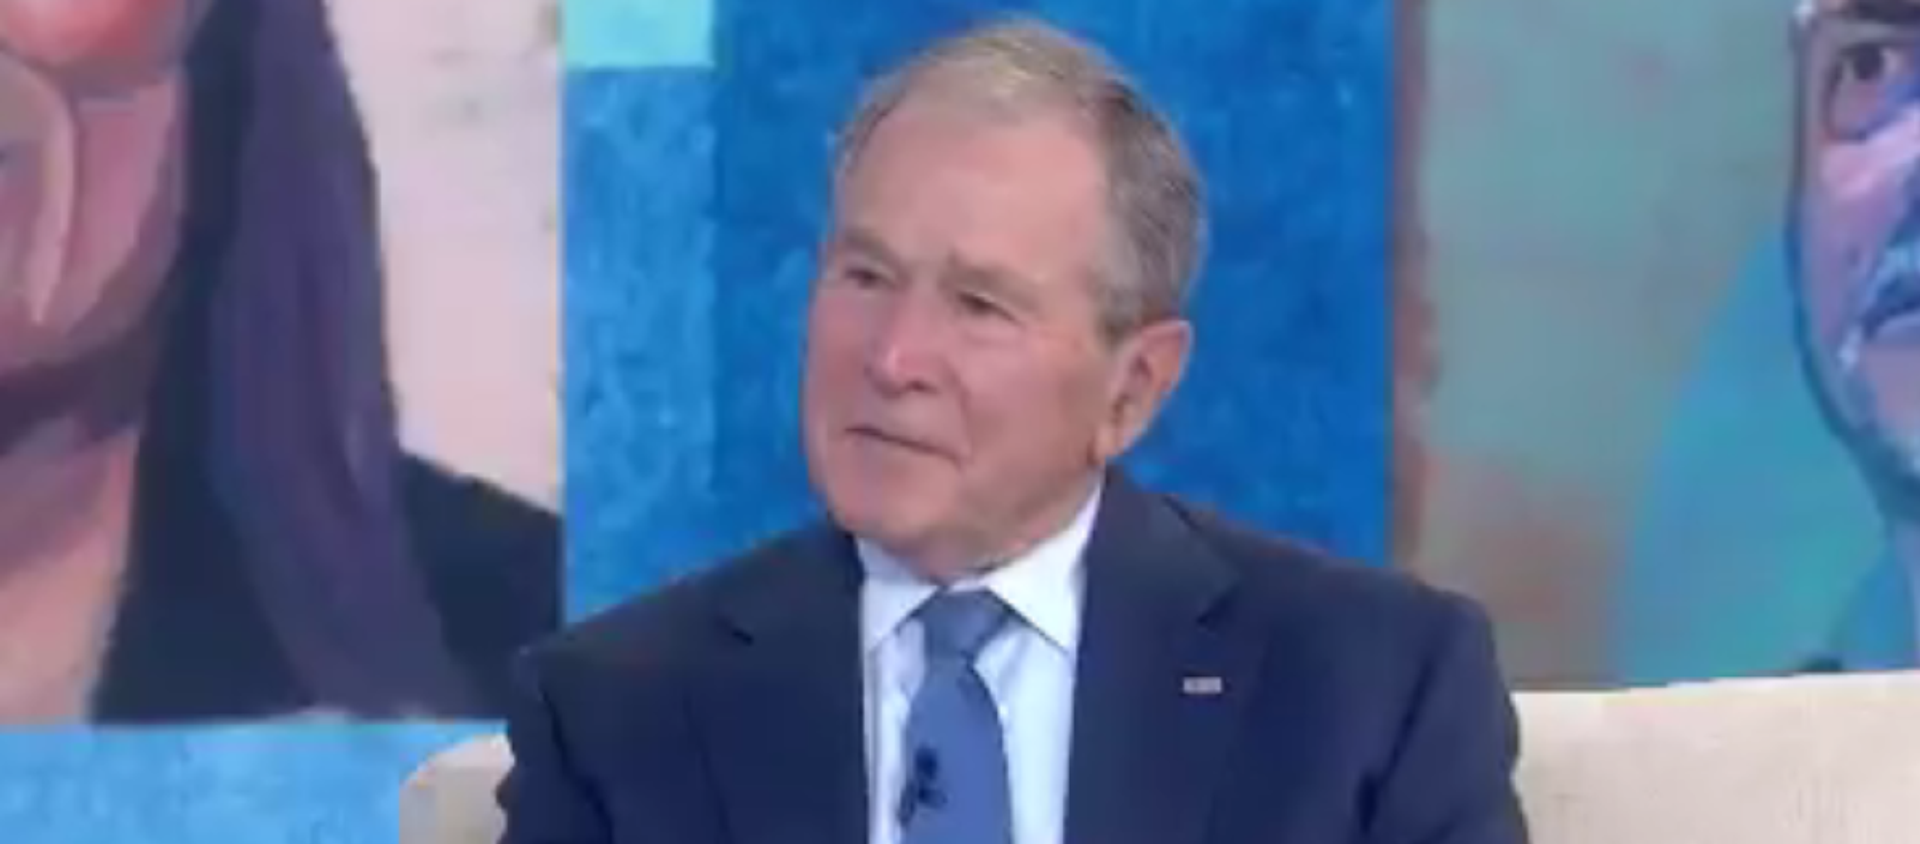 Former US President George W. Bush in an April 20, 2021, interview with NBC's The Today Show - اسپوتنیک افغانستان  , 1920, 21.04.2021